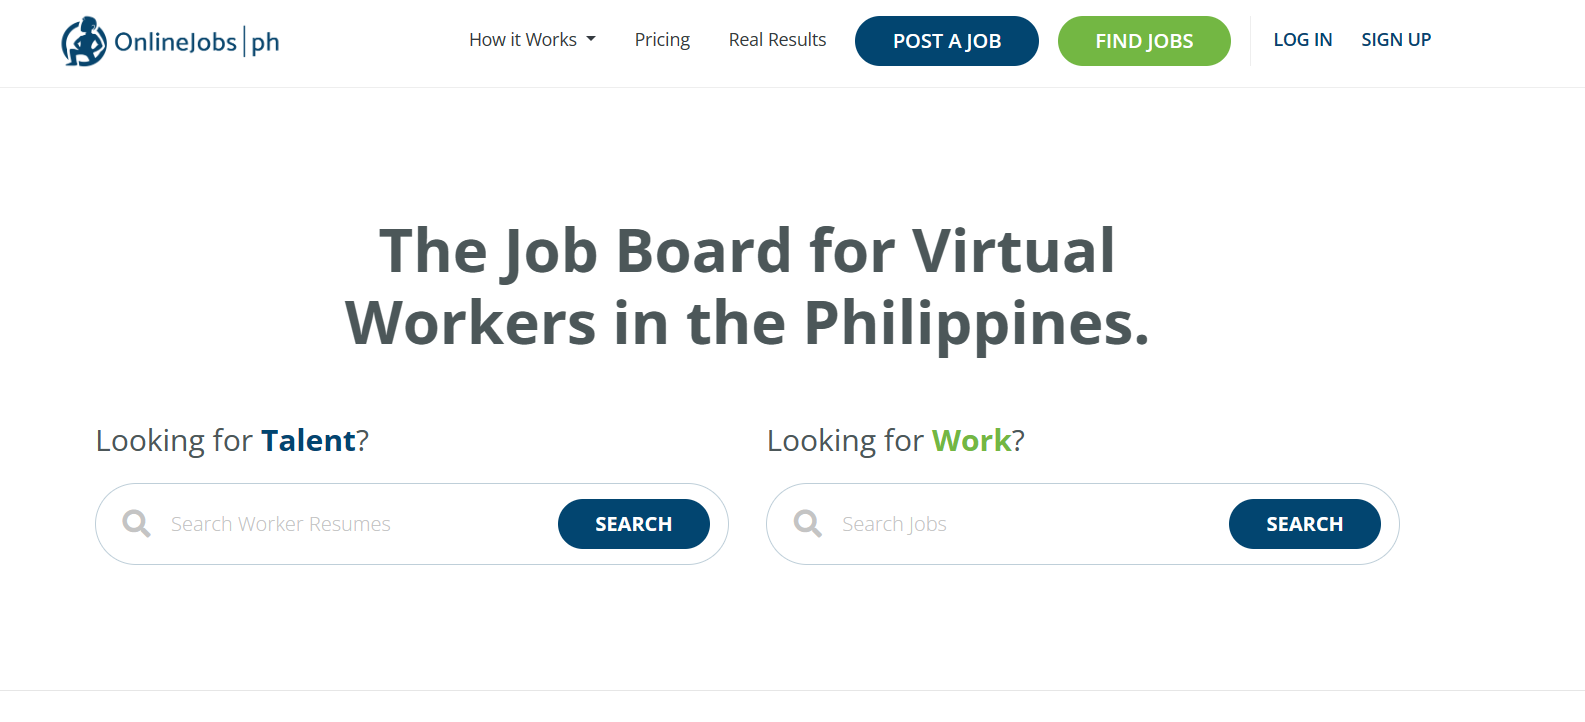 onlinejobs.ph: Hire Filipino workers or work online in Philippines